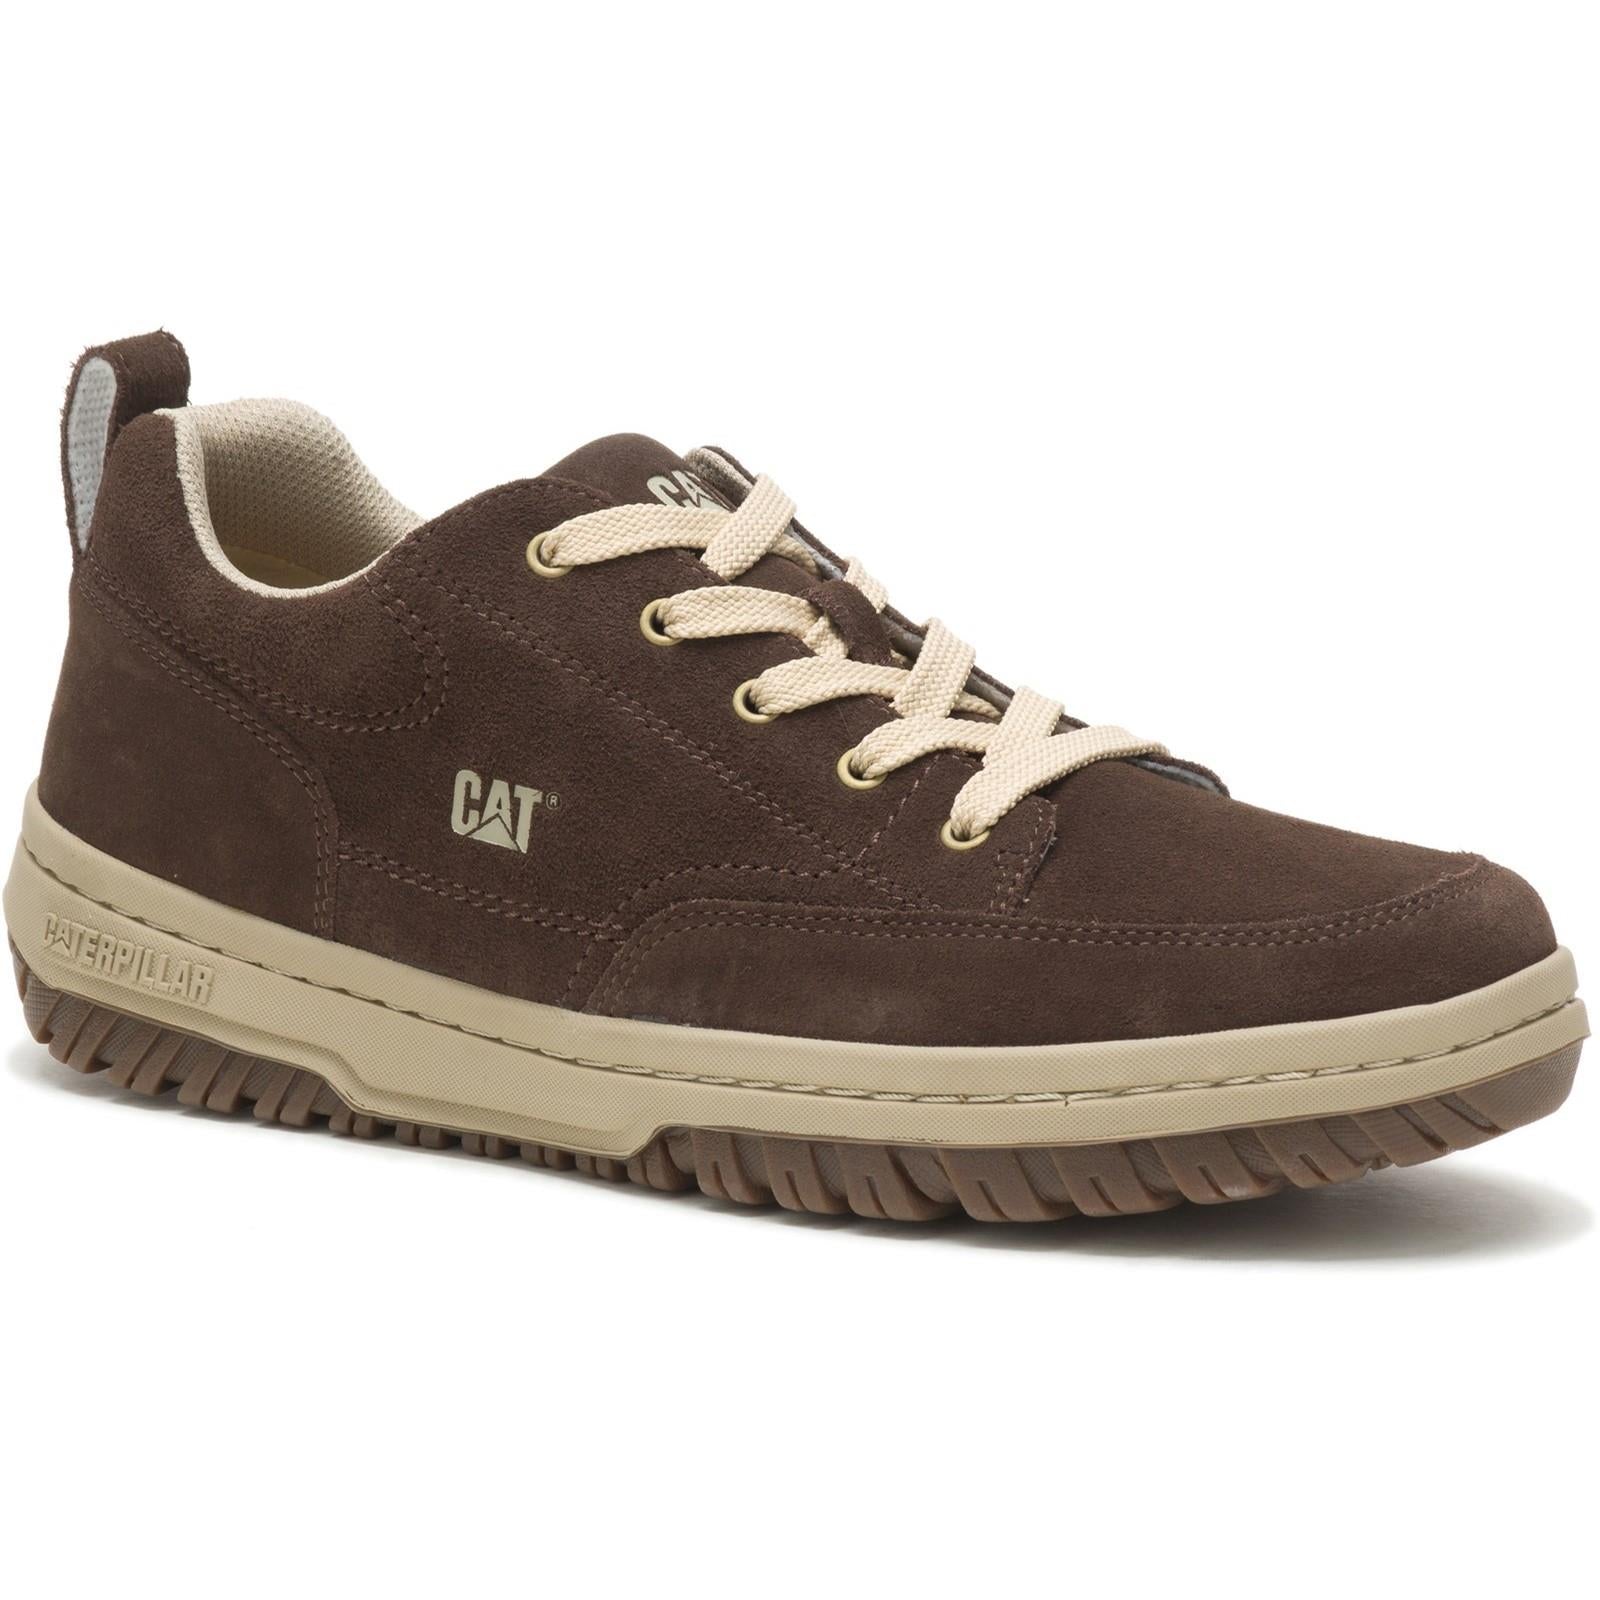 Caterpillar CAT Lifestyle Decade brown leather lace up trainers shoes